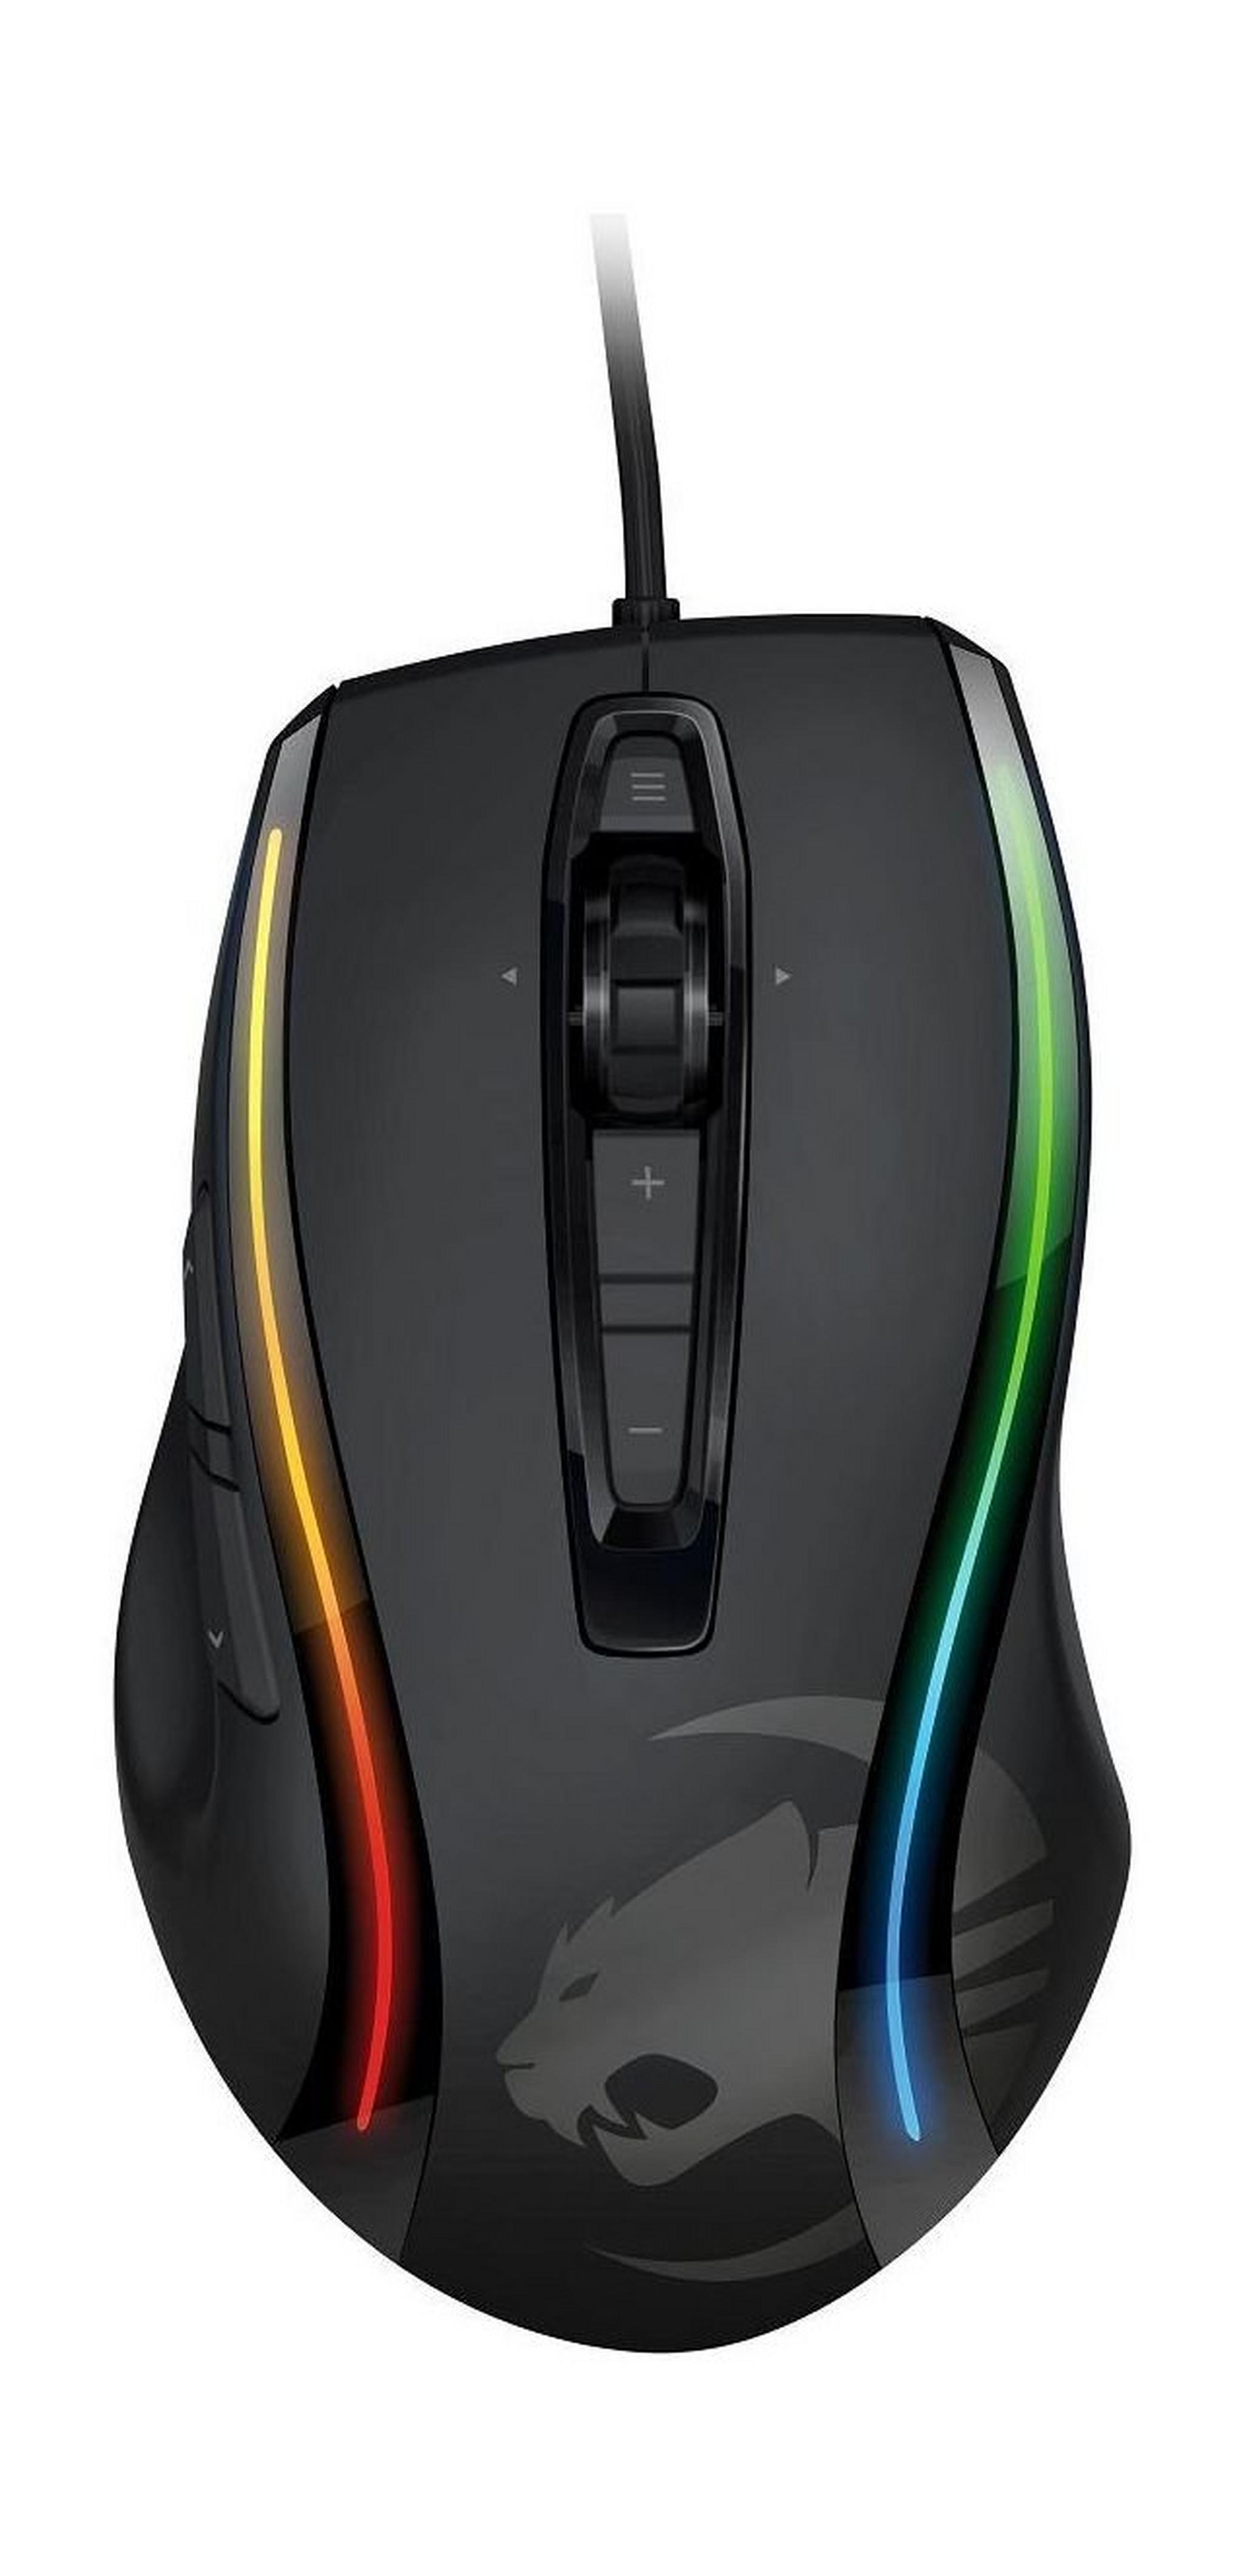 Roccat Kone[+] Gaming Laser Mouse (ROC-11-801)